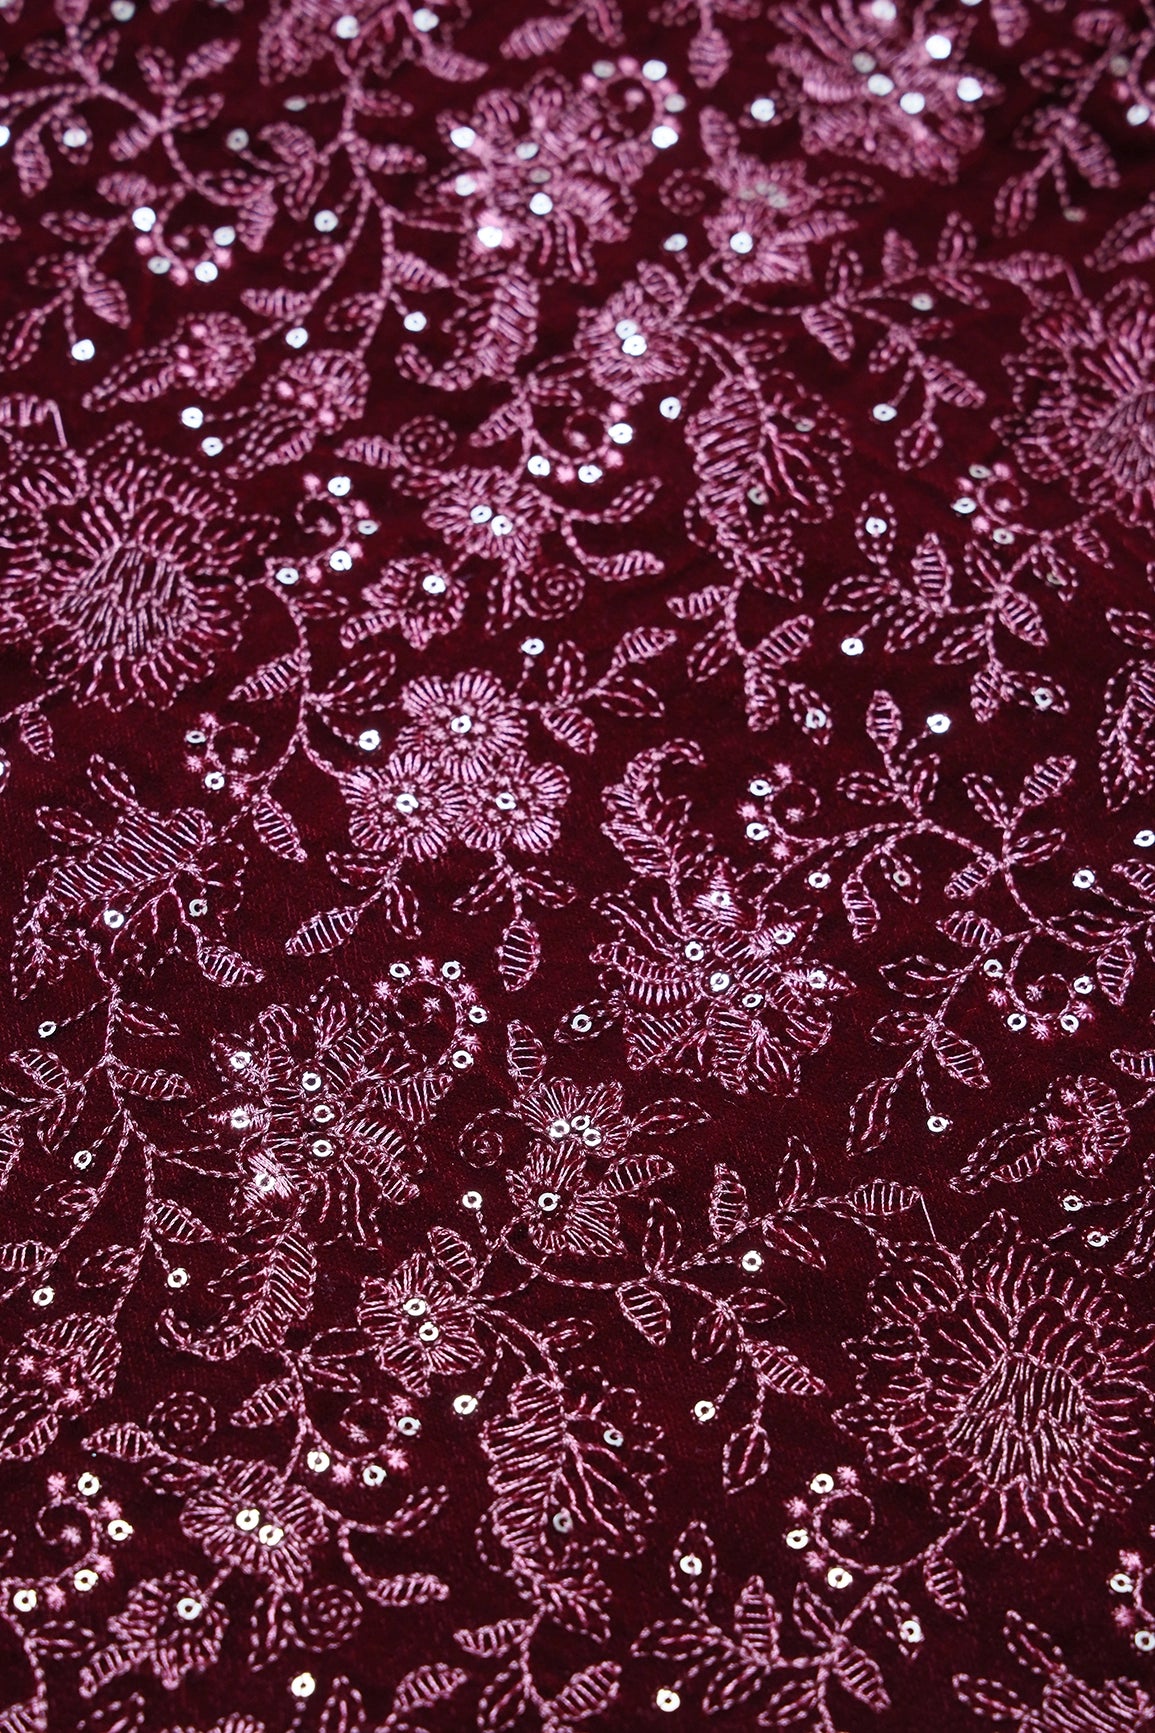 Maroon Thread With Gold Sequins Floral Embroidery Work On Maroon Velvet Fabric